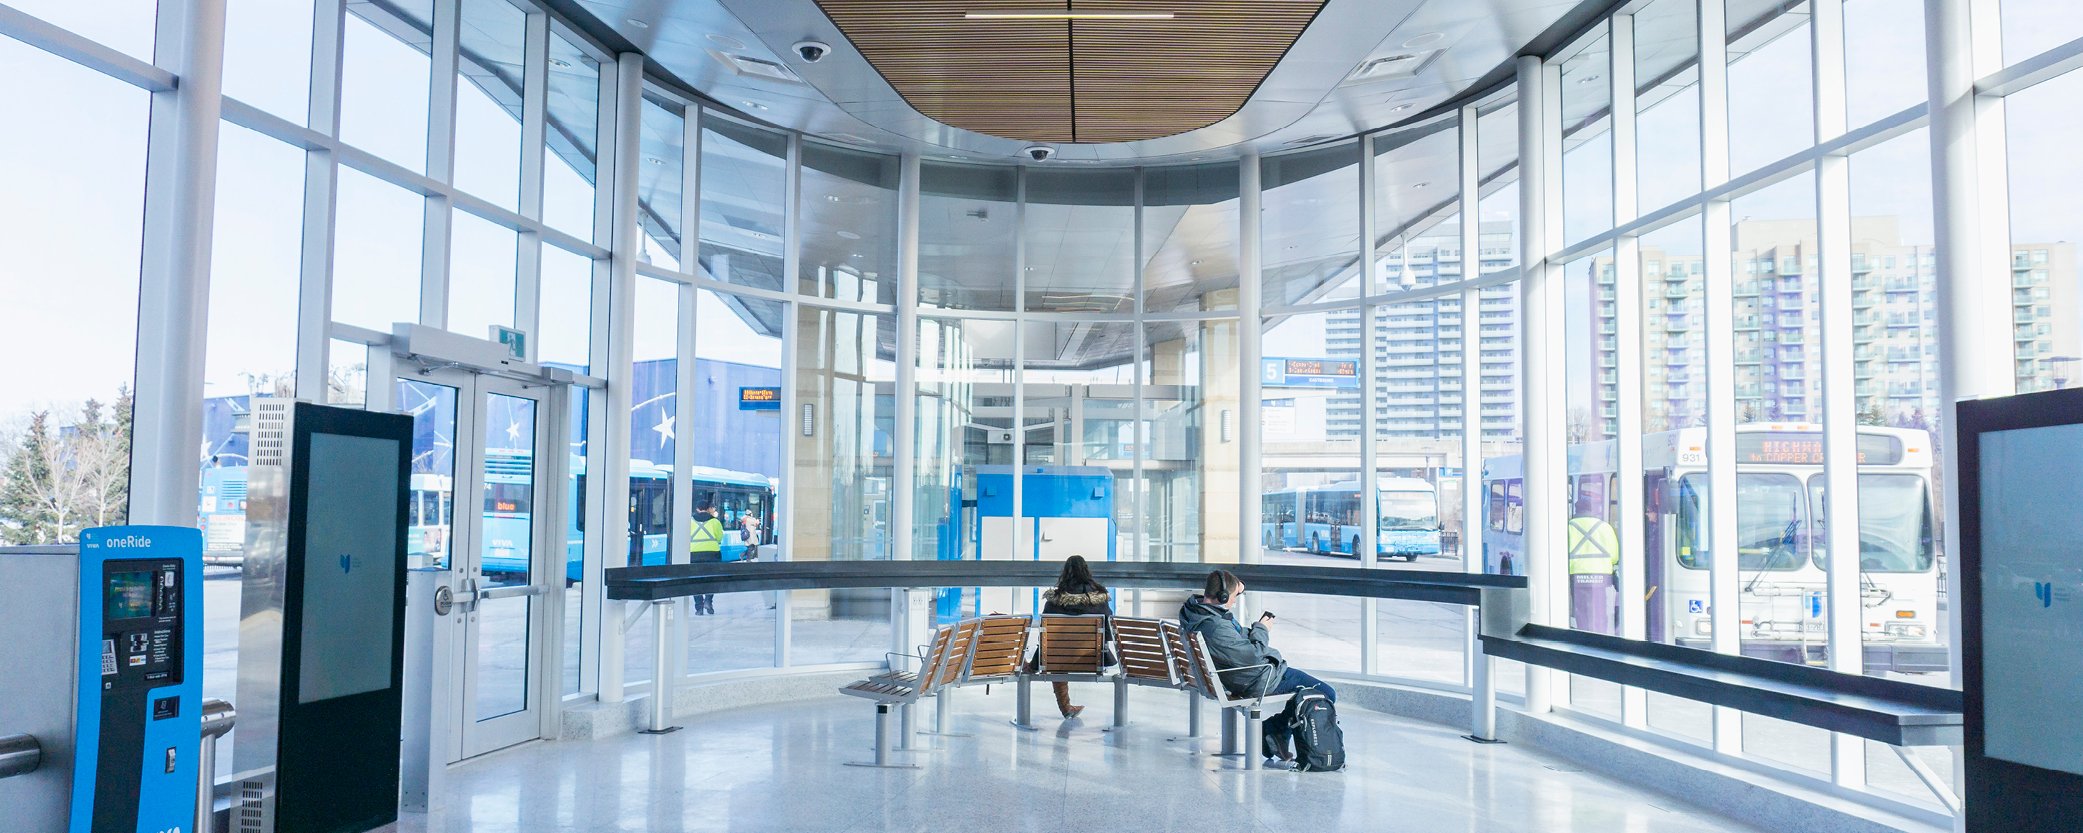 image of the Richmond Hill Centre Terminal Kiosk space